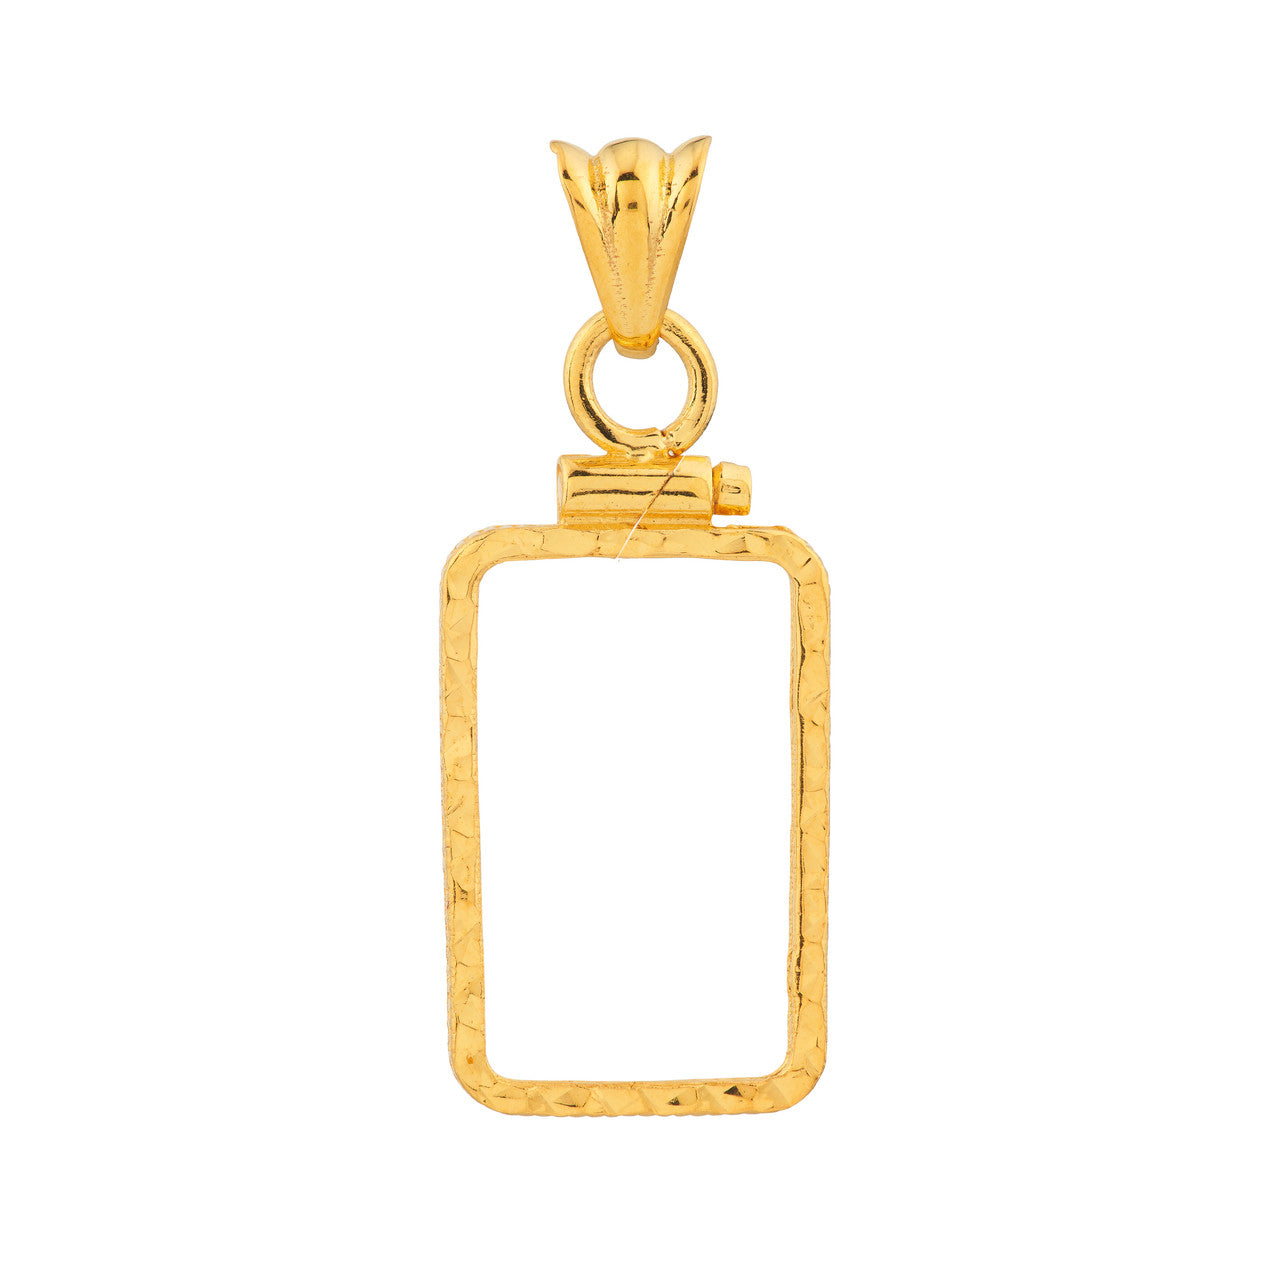 14K Yellow Gold Pamp Suisse Lady Fortuna 2.5 gram Bar Coin Bezel Diamond Cut Screw Top Frame Mounting Holder Pendant Charm